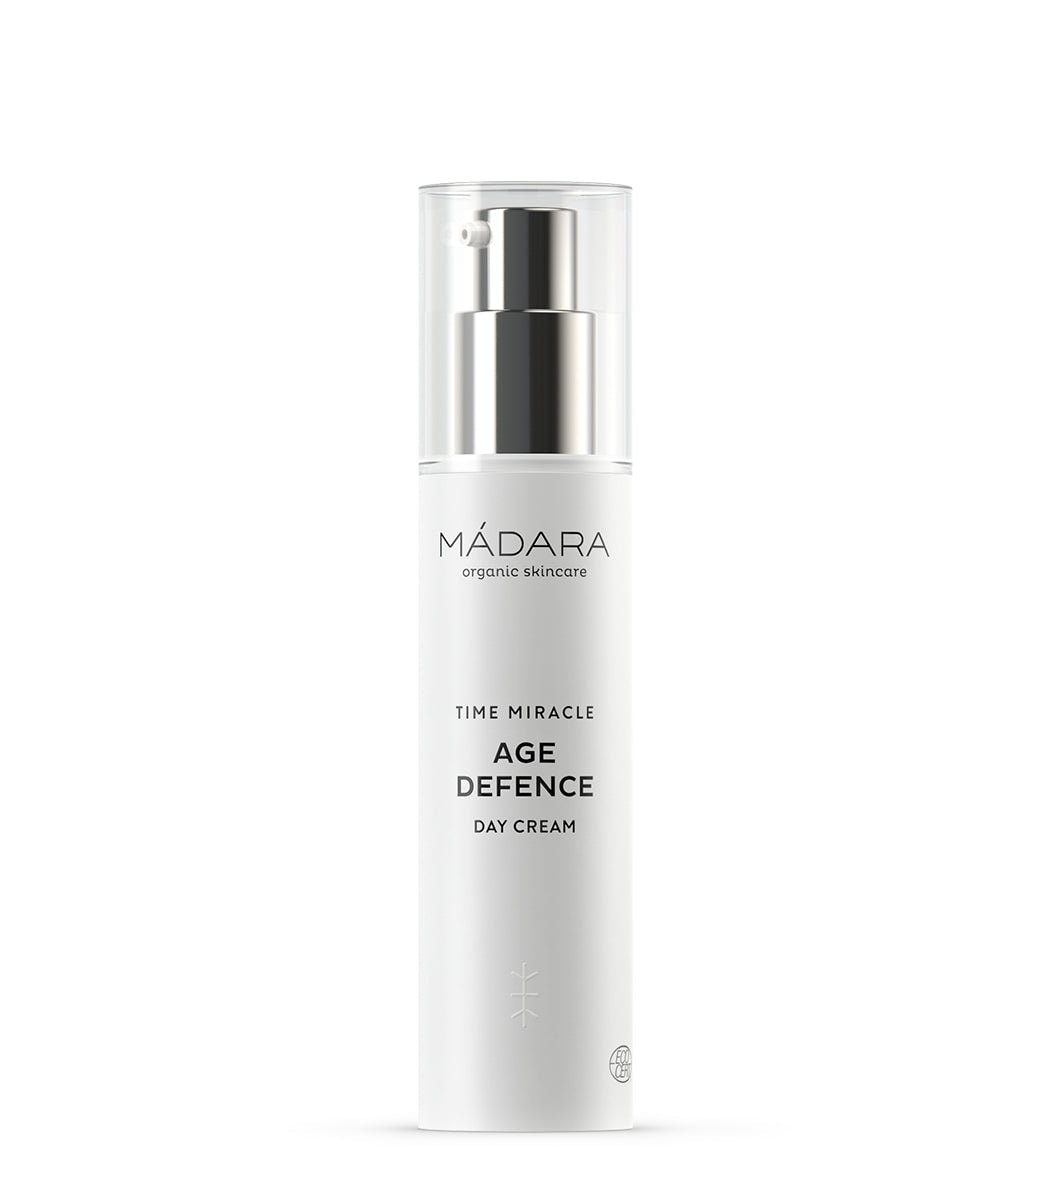 Madara Organic Skincare Time Miracle Age Defence Day Cream 50ml